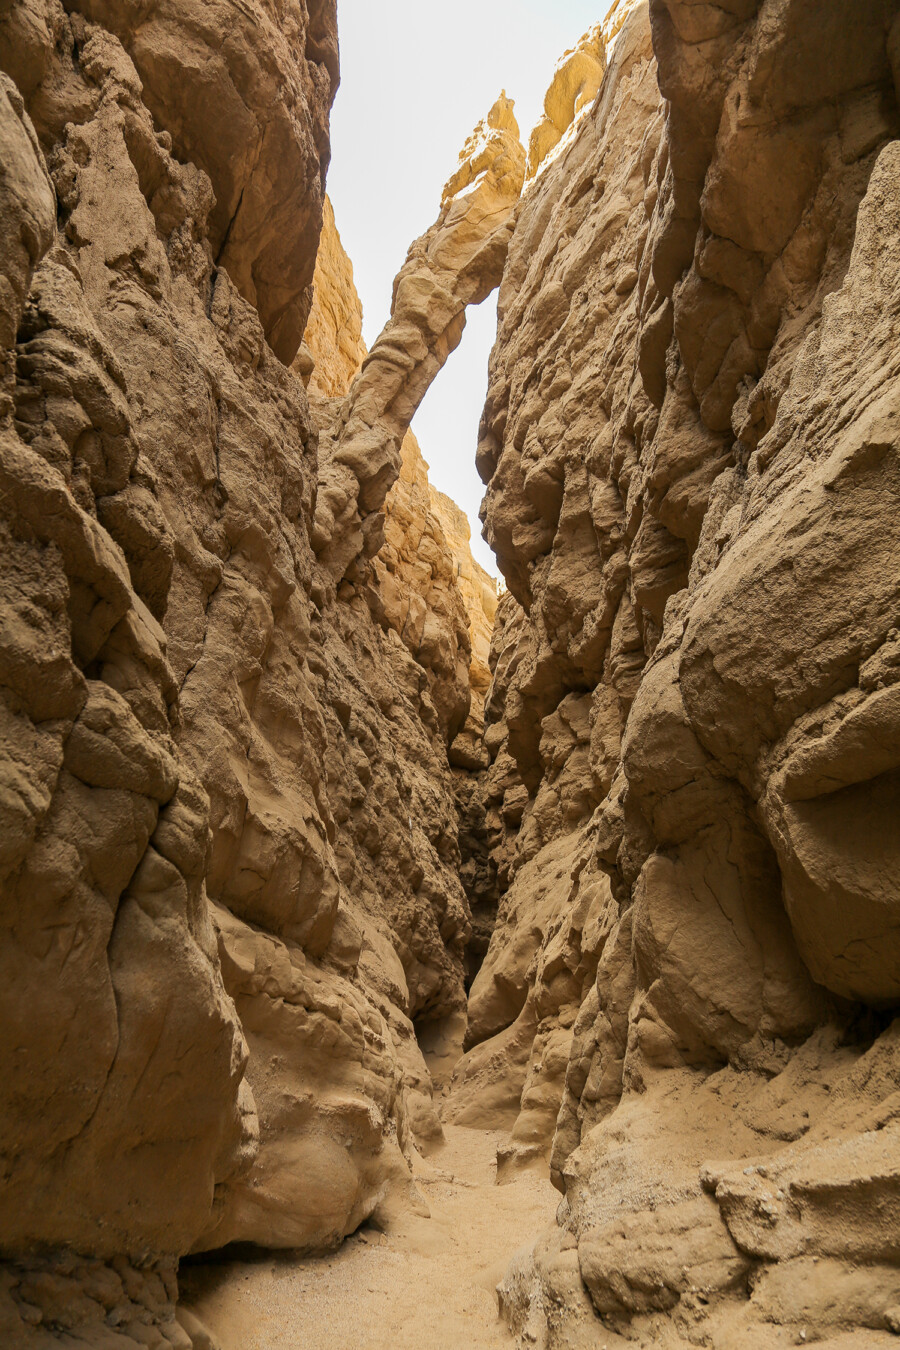 View of a rocky passageway at Slot Trail in Anza Borrego Desert State Park, California.